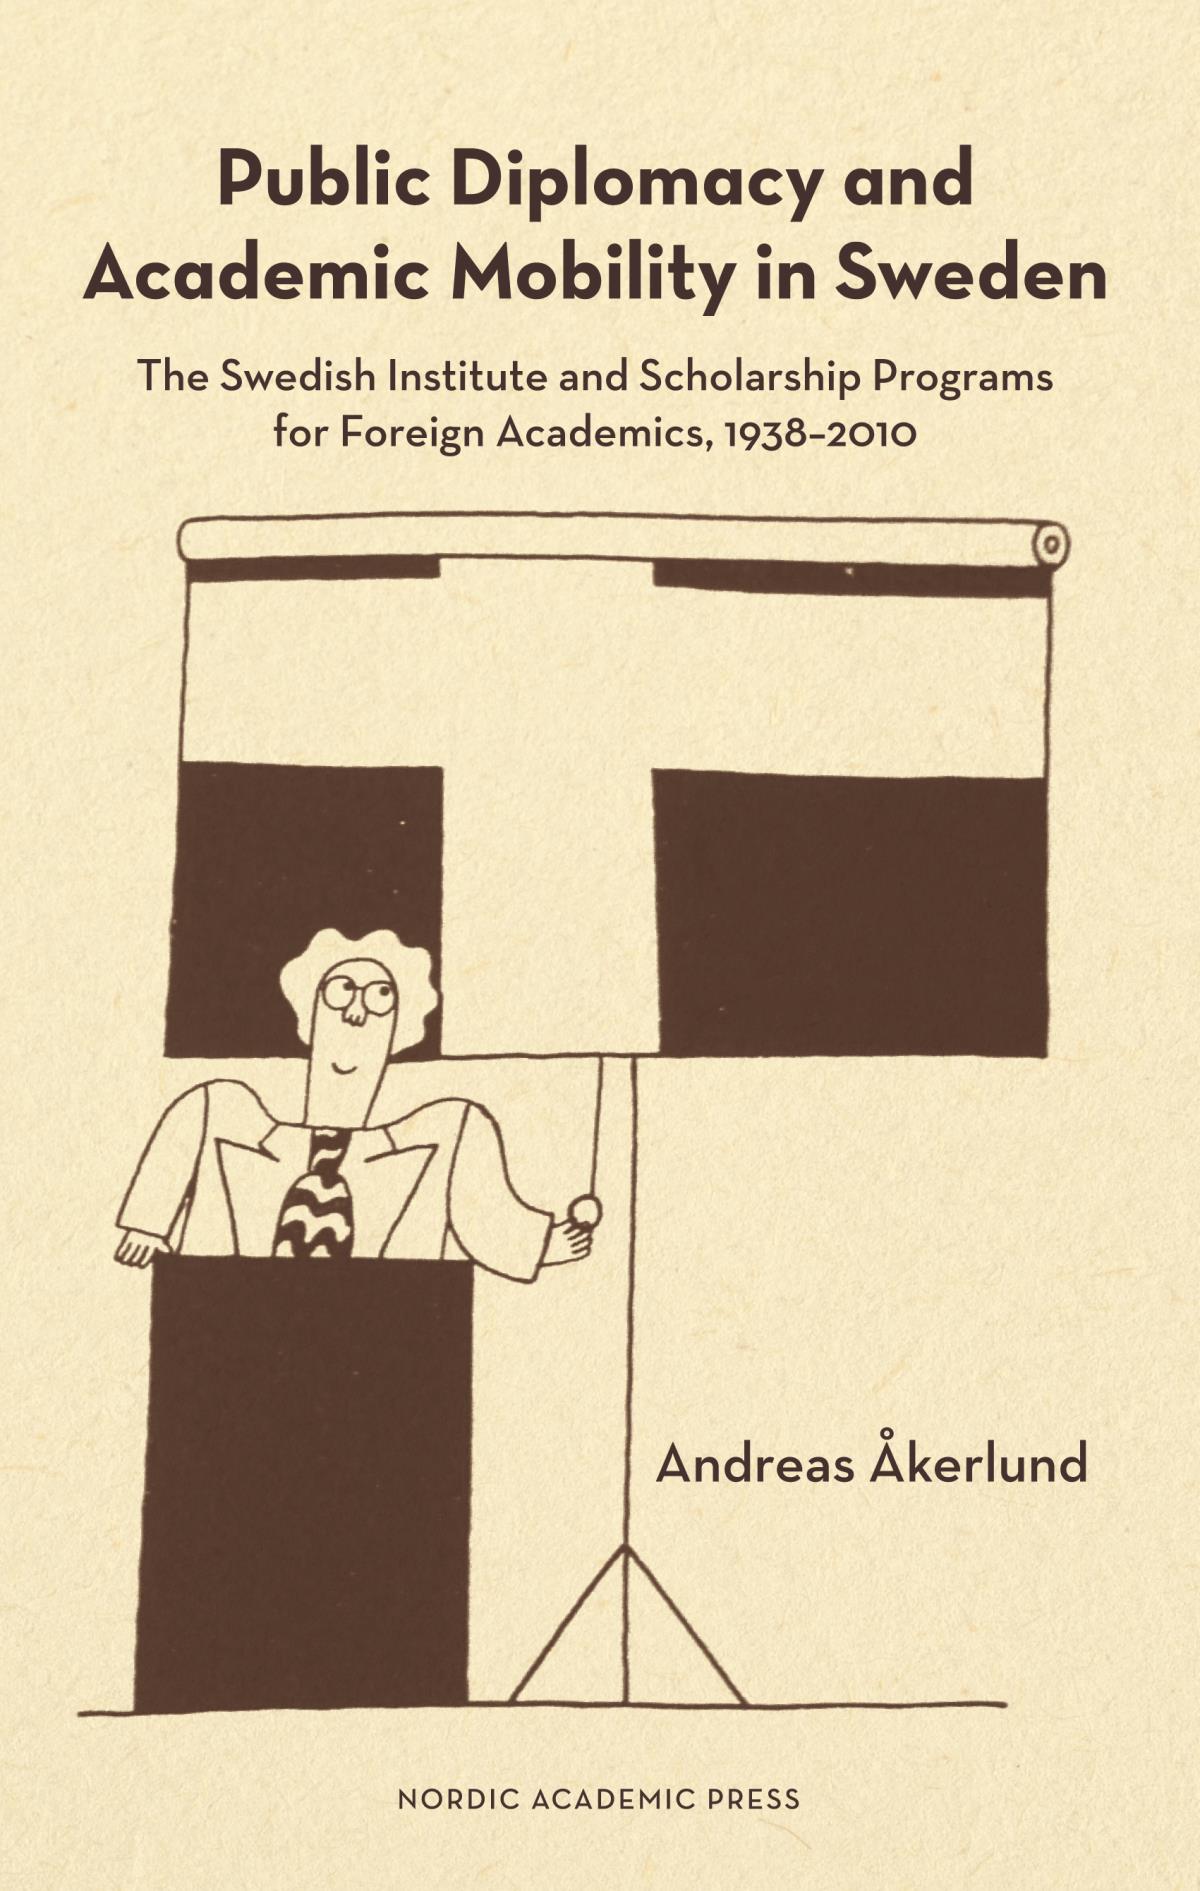 Public Diplomacy And Academic Mobility In Sweden - The Swedish Institute And Scholarship Programs For Foreign Academics 1938-2010